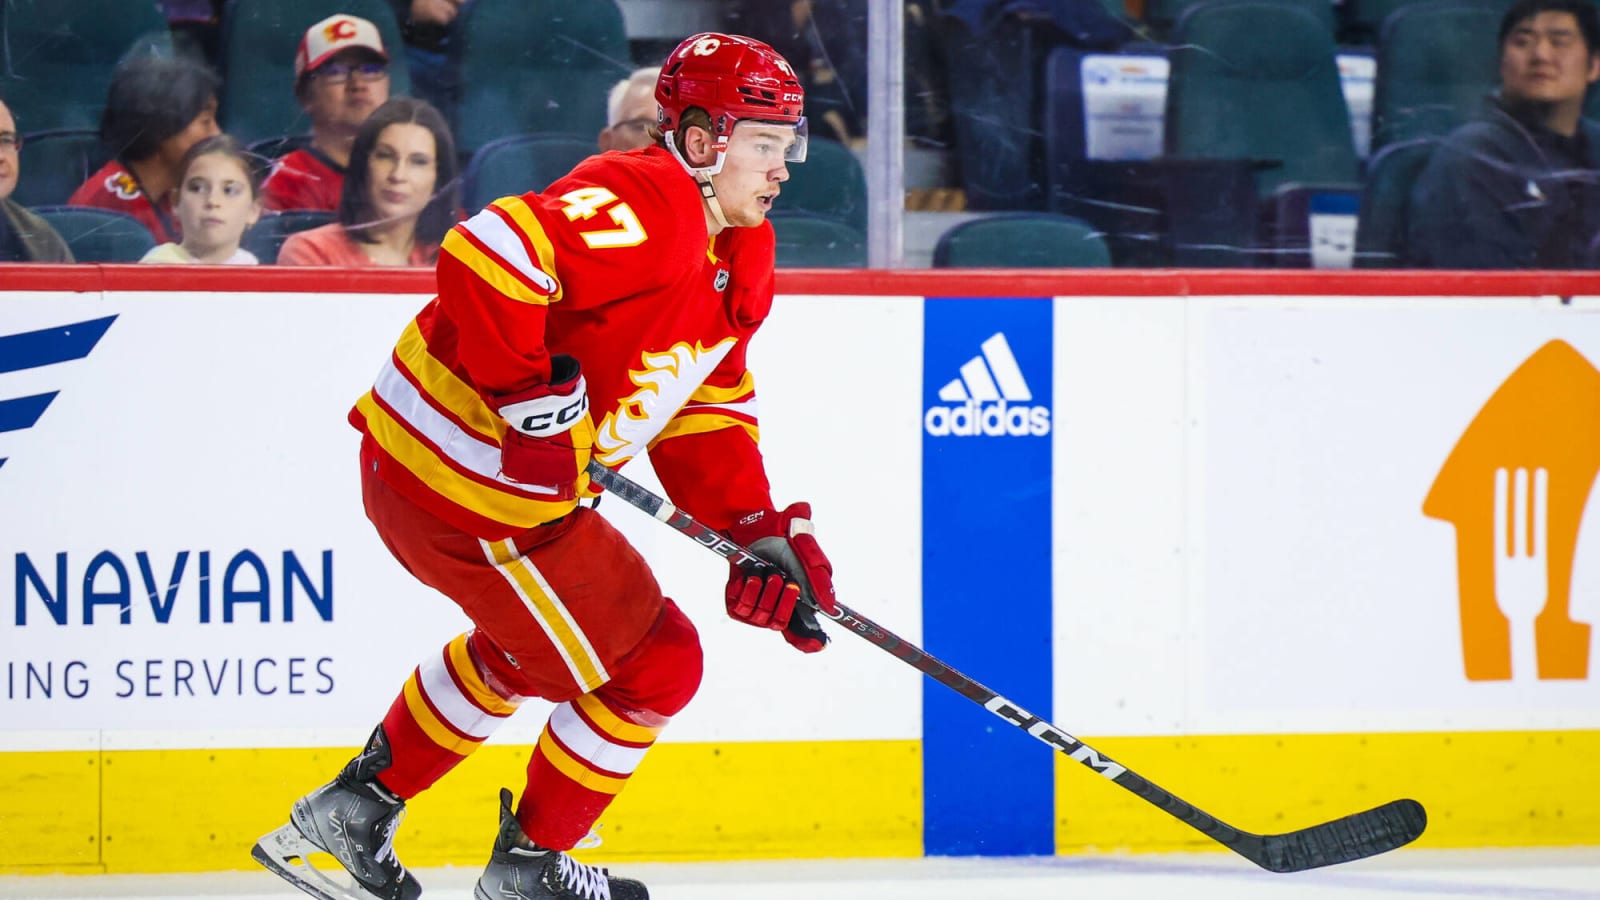 The Calgary Flames rolled out some new looks at Sunday’s practice